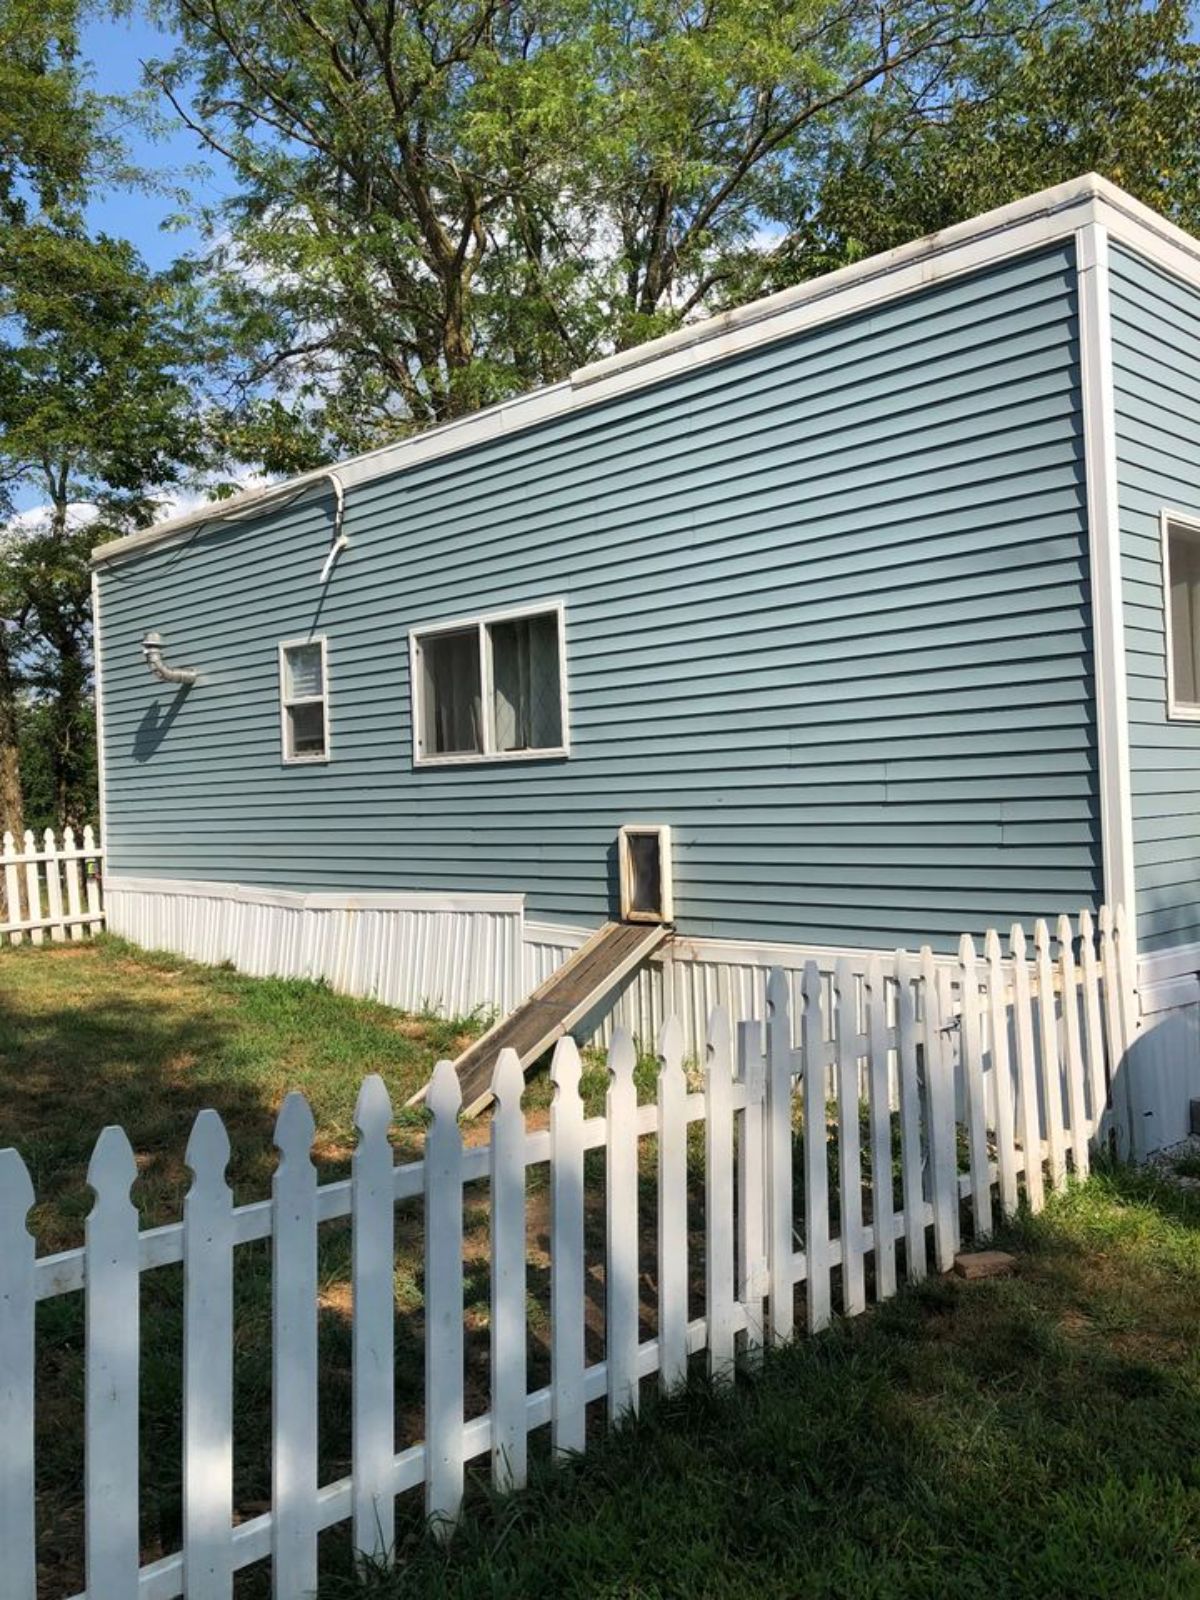 backside of fully furnished tiny home has a small garden type place to enjoy with kids or pets